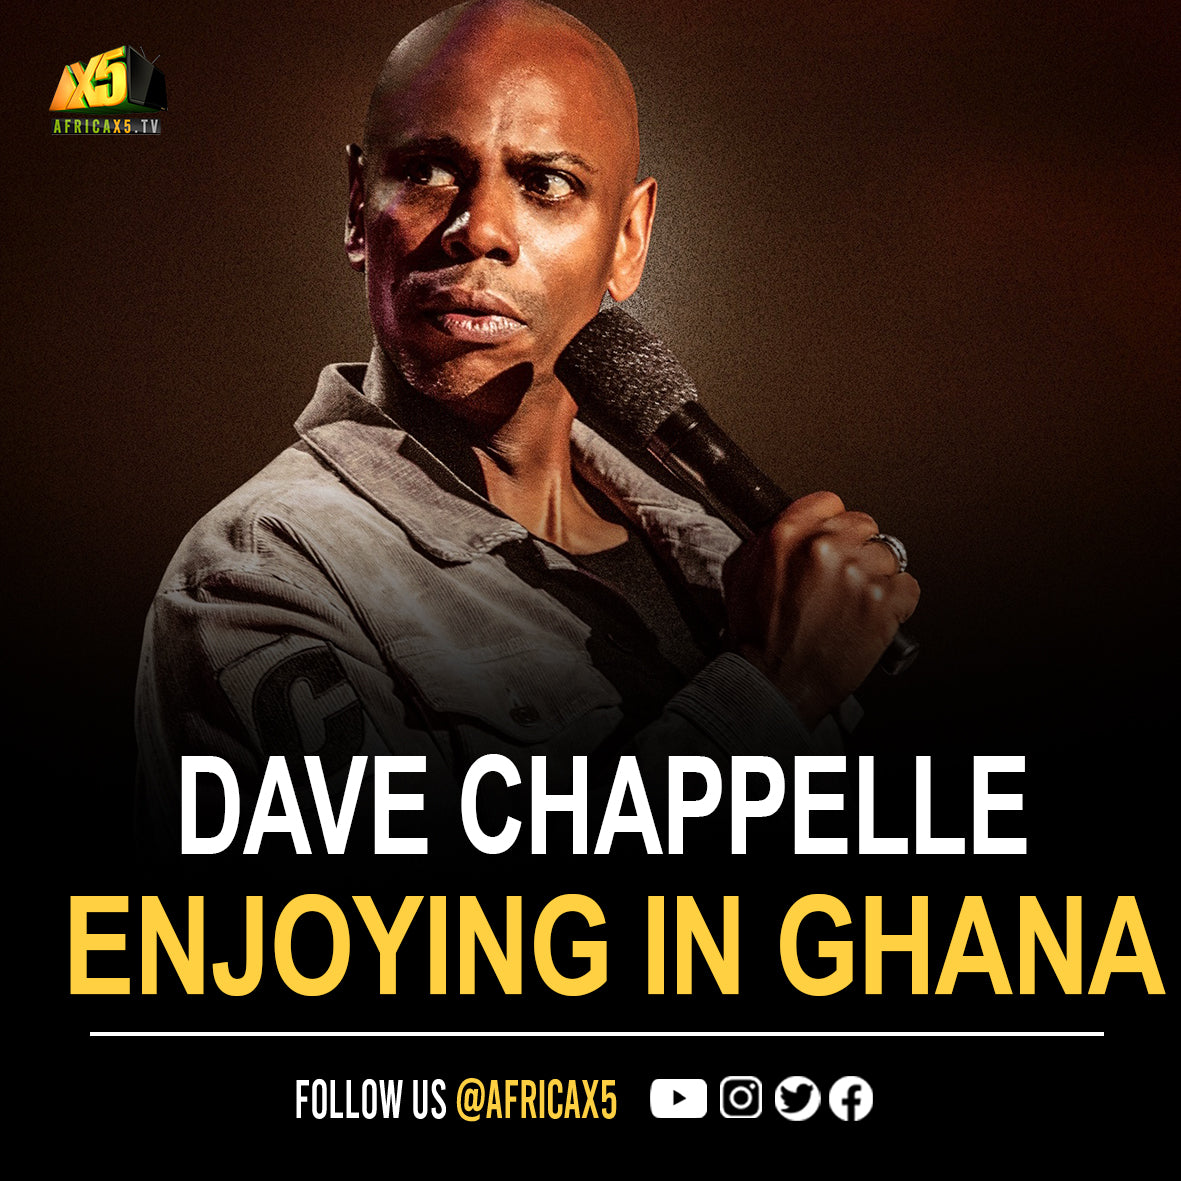 American Comedian and Actor Dave Chappelle happy enjoying his time in Ghana.